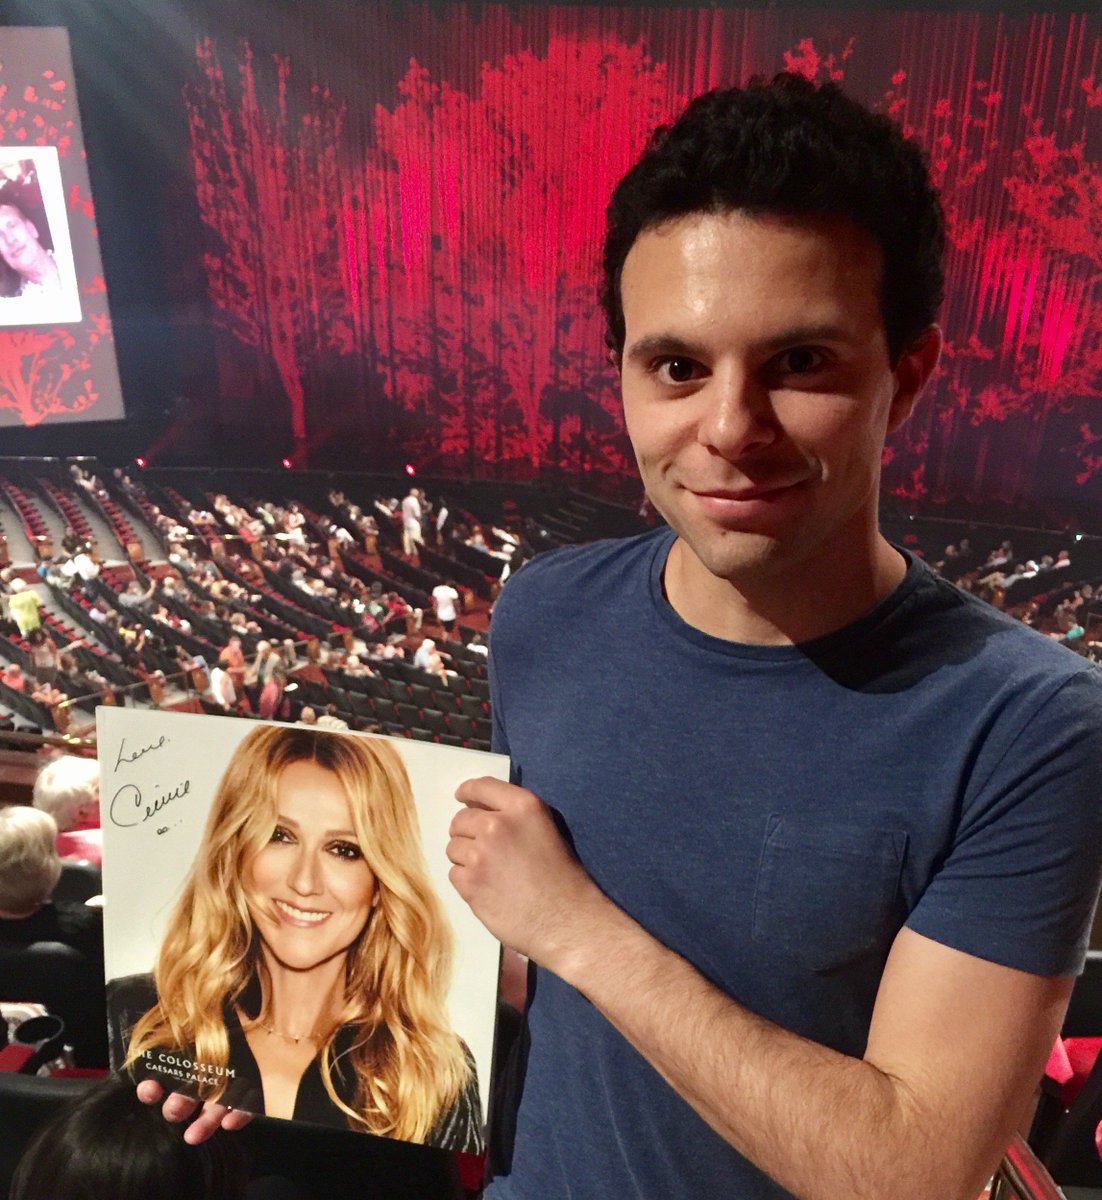 Congratulations to our winner Romain ! - TC #celinedionvegas https://t.co/dYwtsl8tly